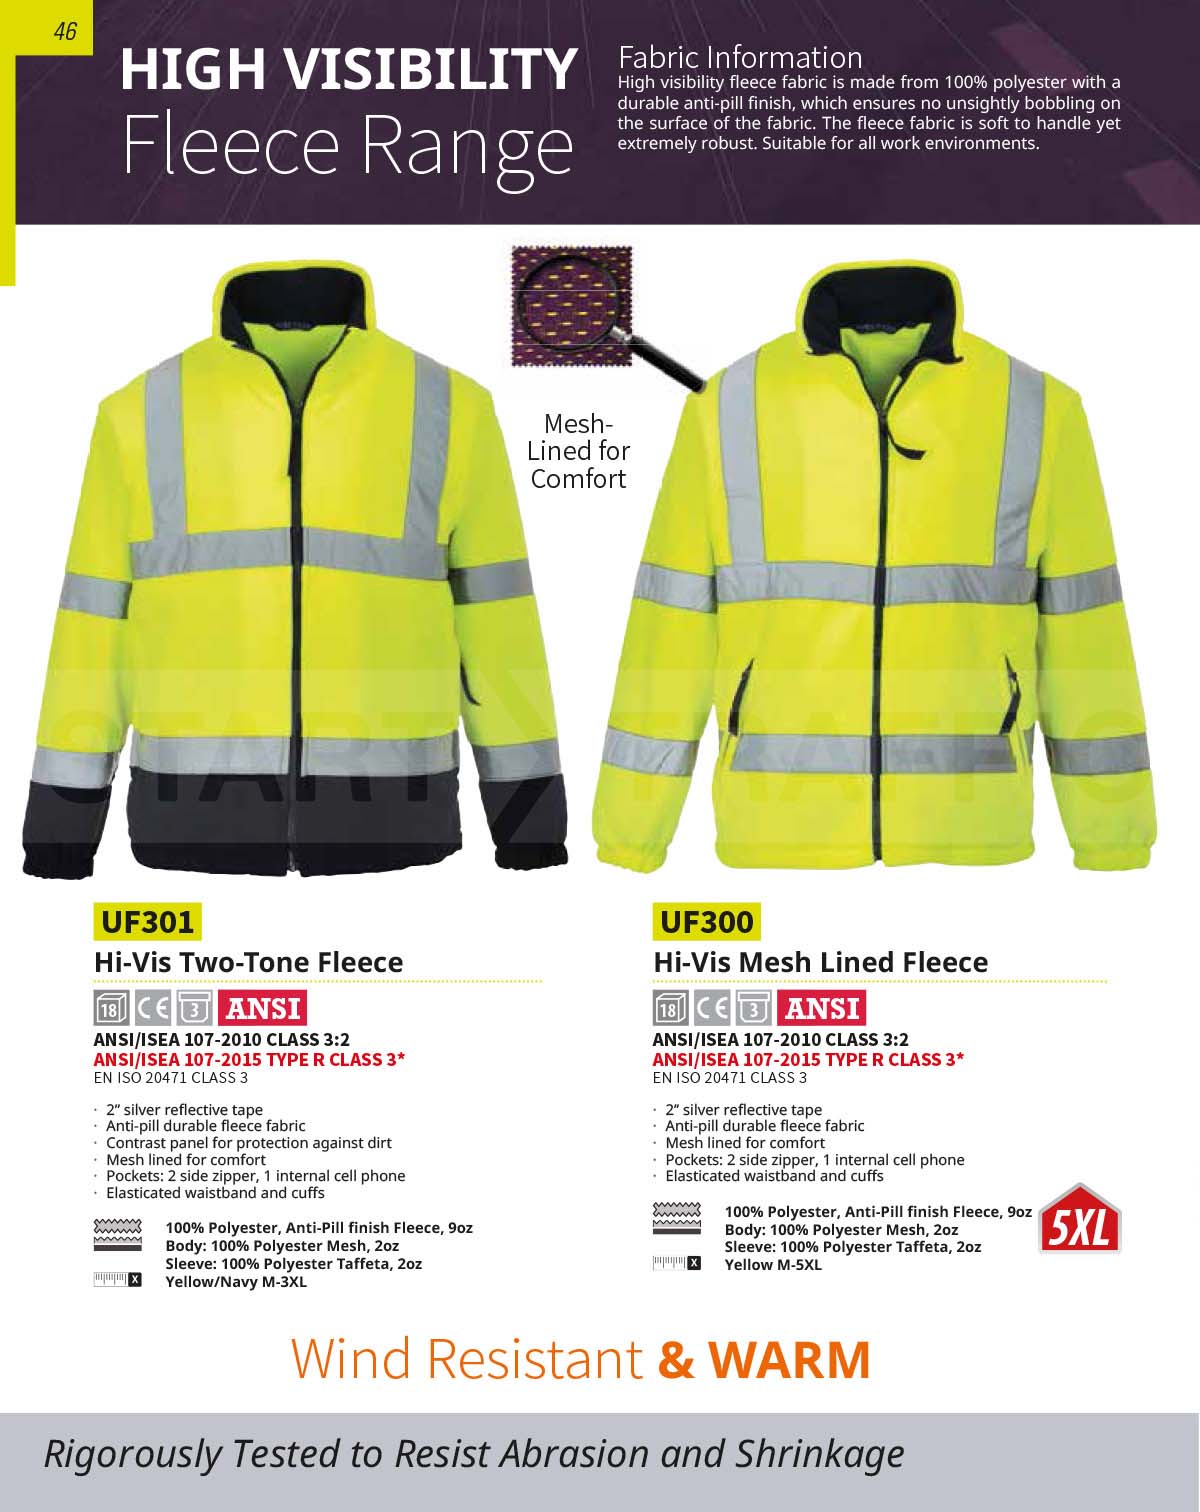 UF301 Two-Tone High Visibility Fleece Without Contrast